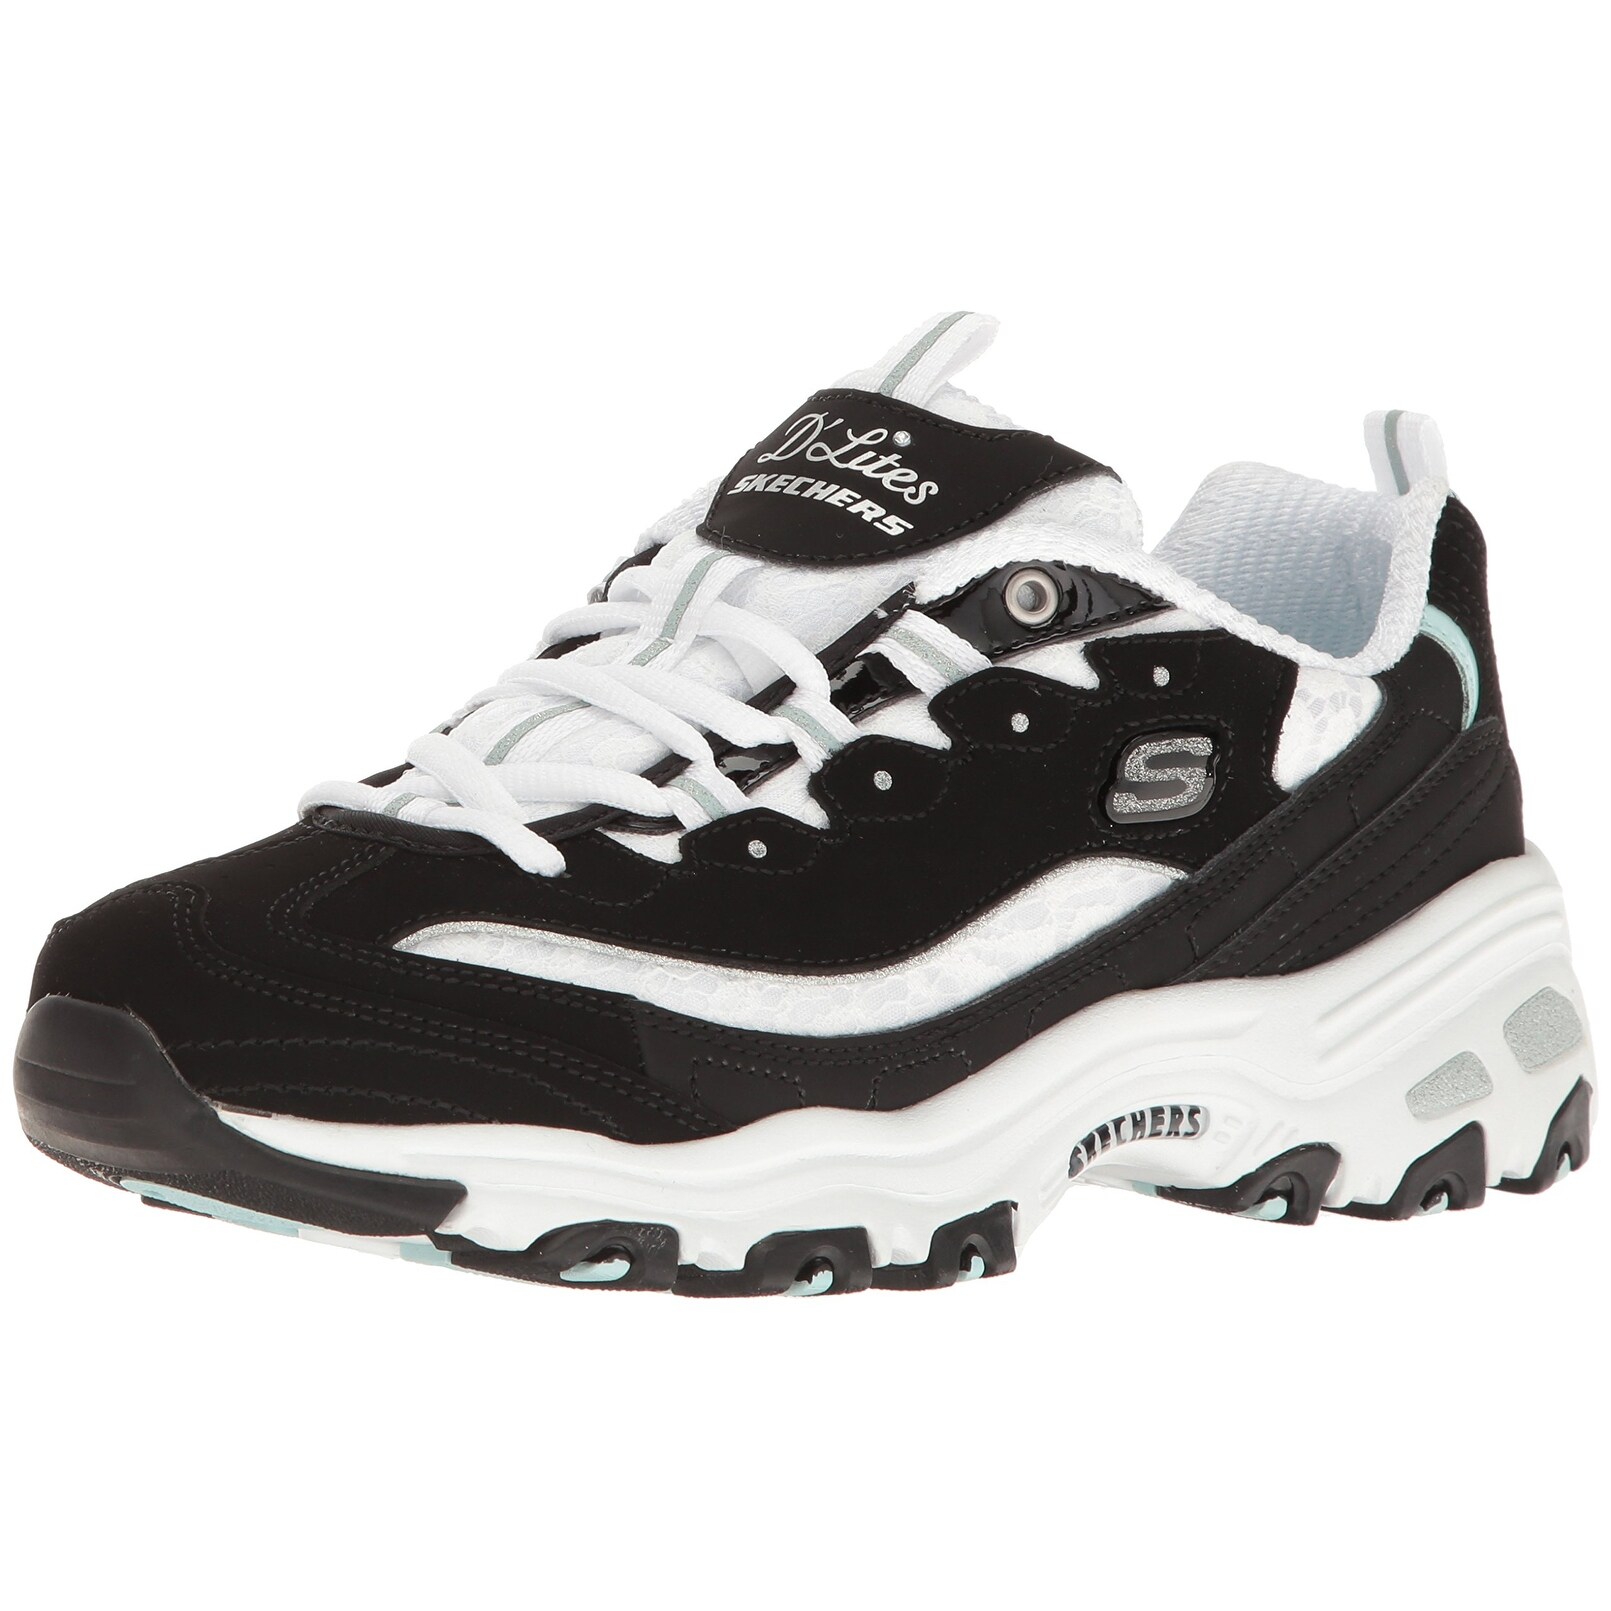 black skechers with white soles